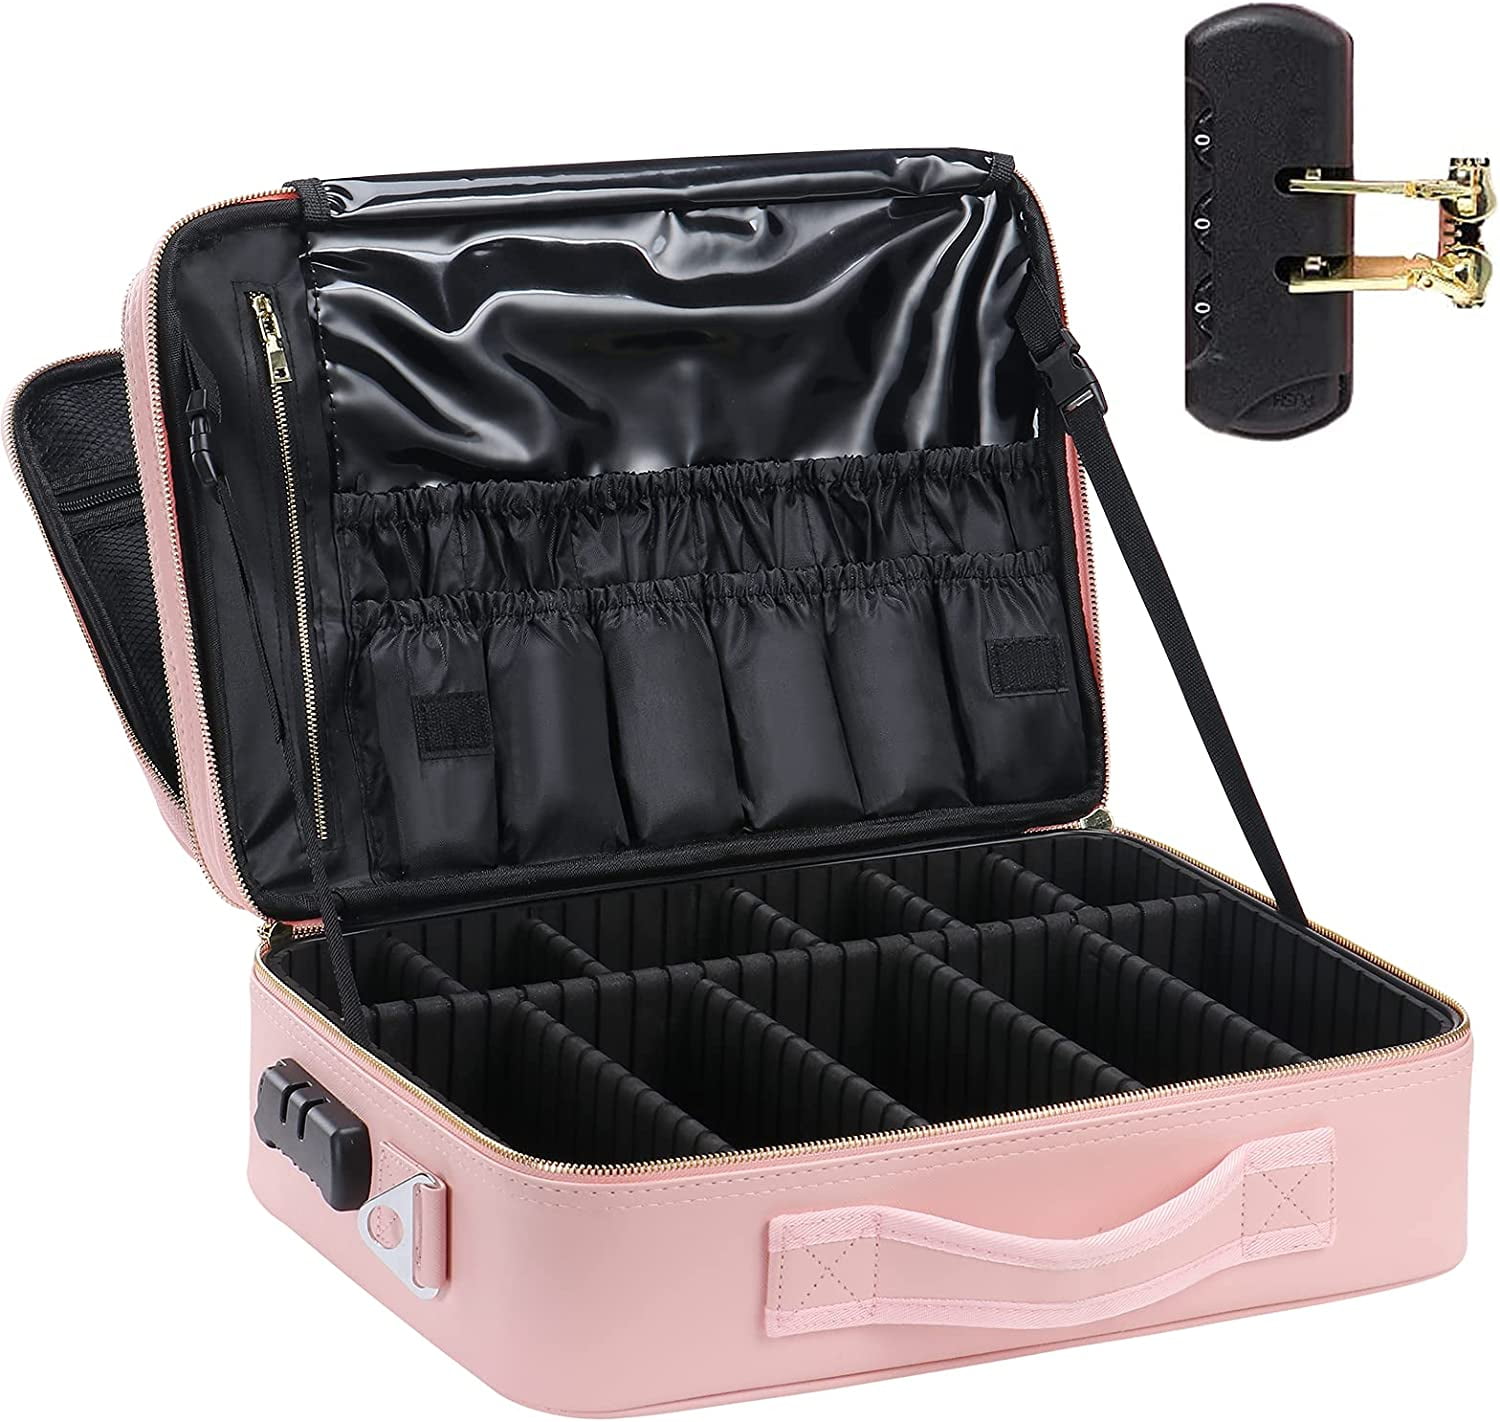 Professional Cosmetic Makeup Kit Storage Organizer Travel Toiletry Vanity  Bag with Adjustable Compartment, 26l x 23b